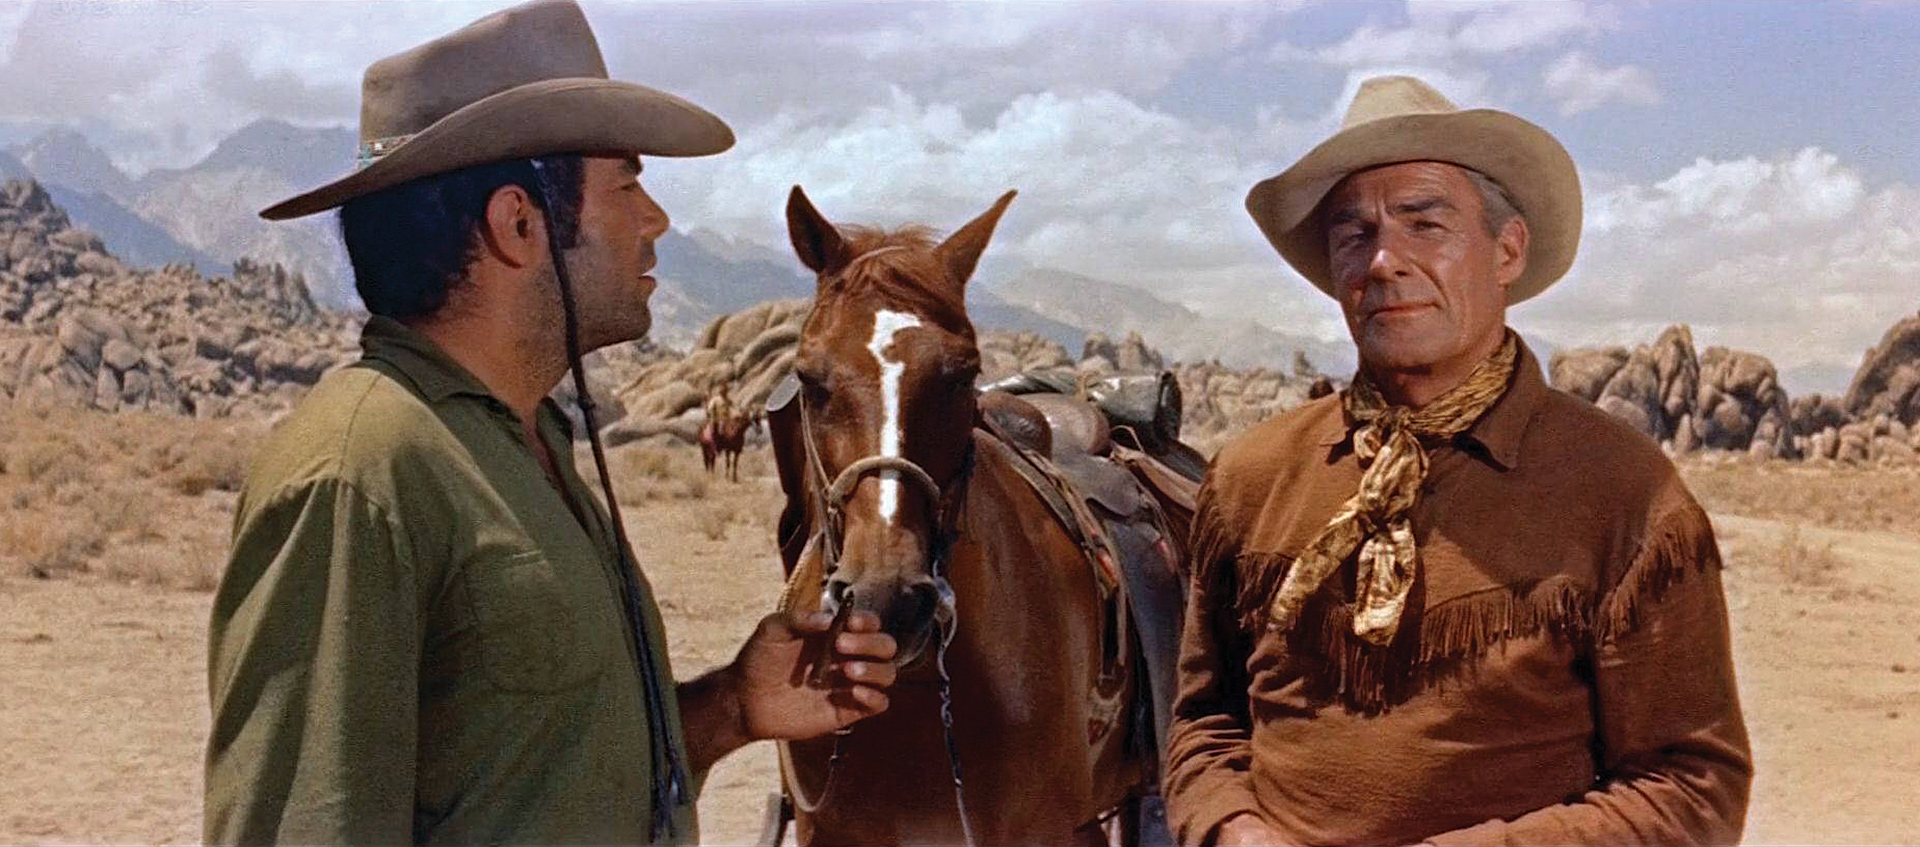 Still with Pernell Roberts and Randolph Scott from the 1959 Budd Boetticher film Ride Lonesome